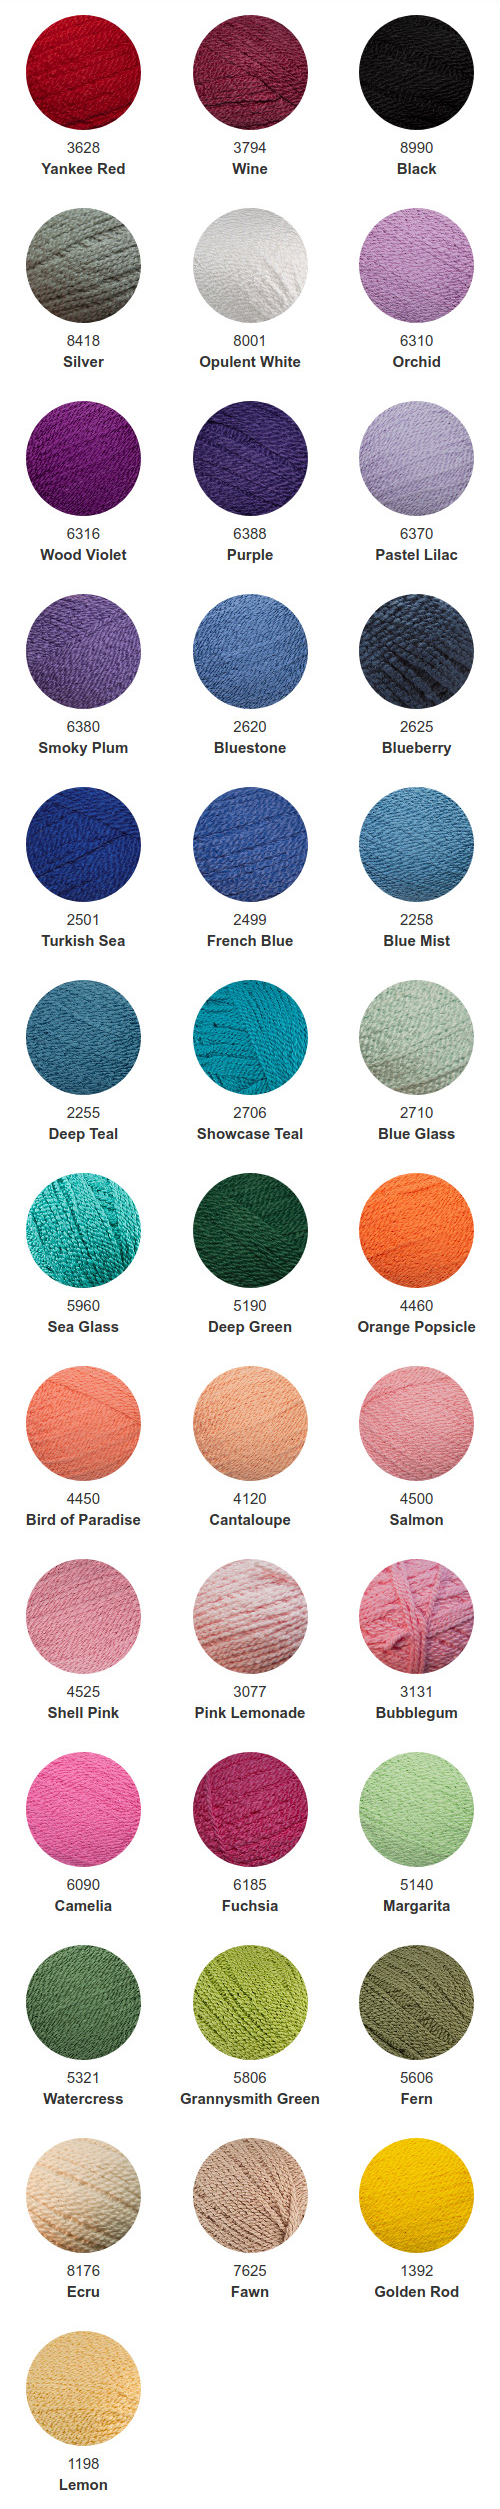 Cascade Yarns : Fixation Solids (couleurs)